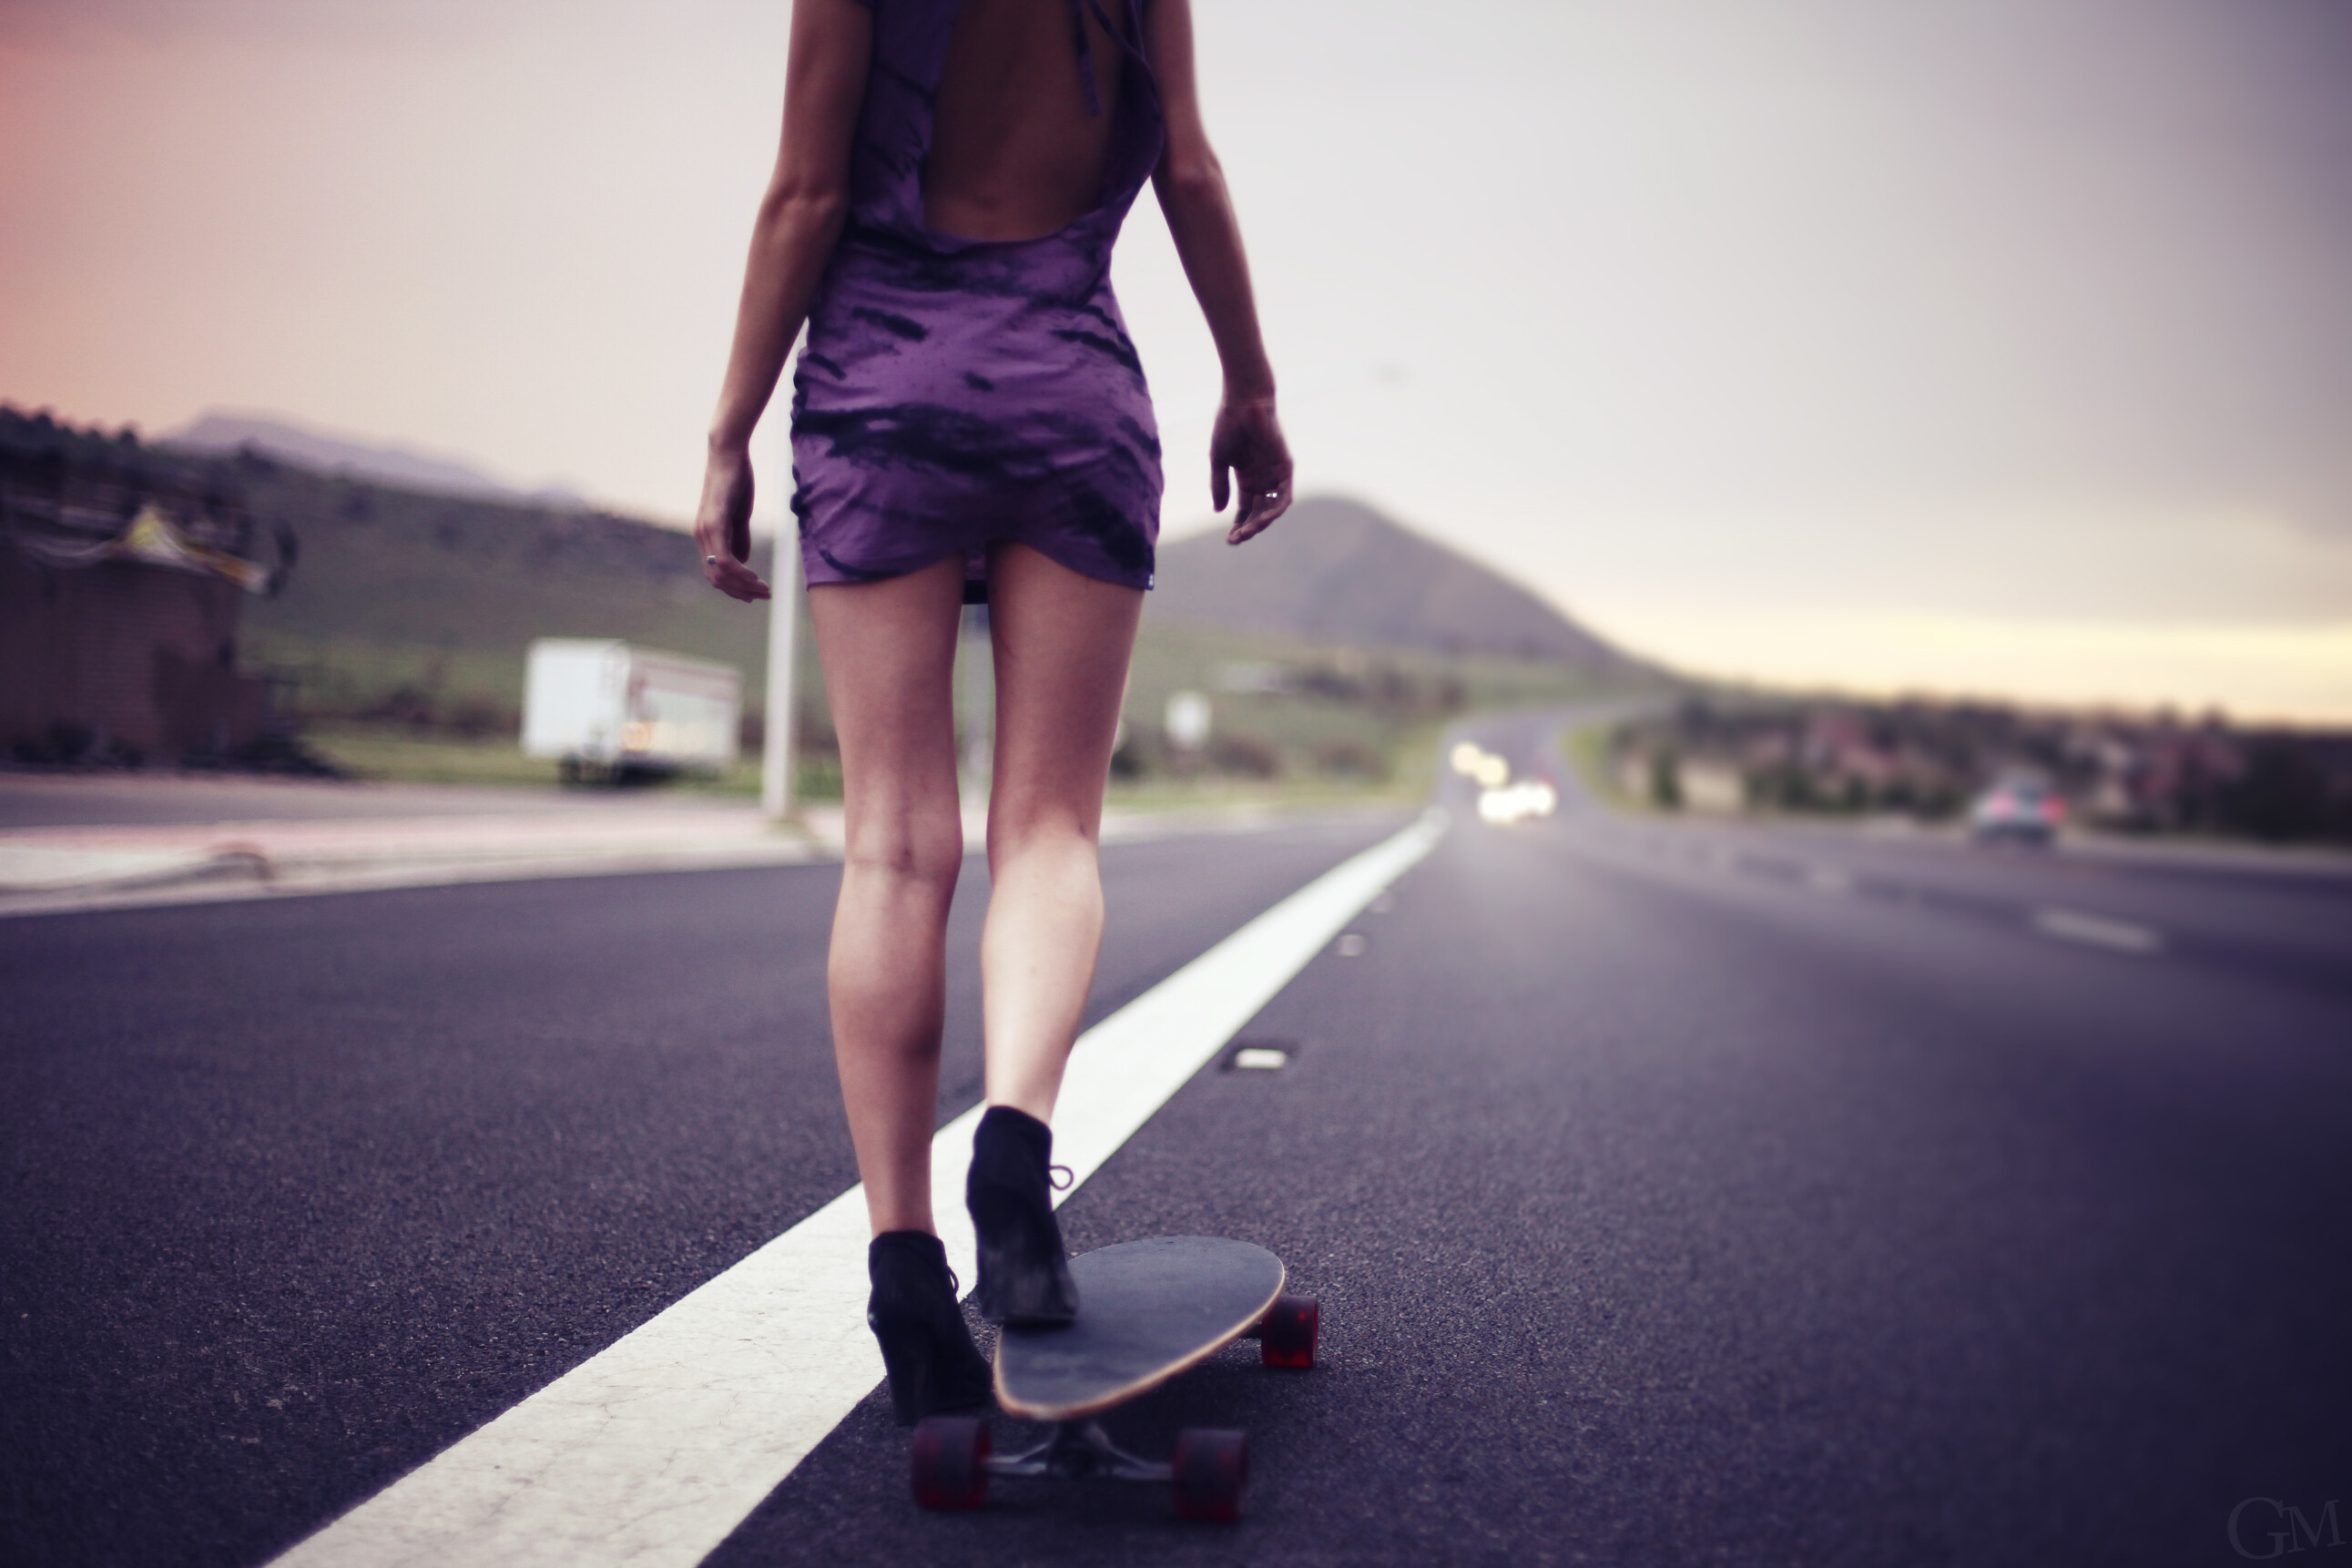 Girl Skateboarding: The act of riding on a longboard, Commuting, A practical means of personal transport. 2590x1730 HD Wallpaper.